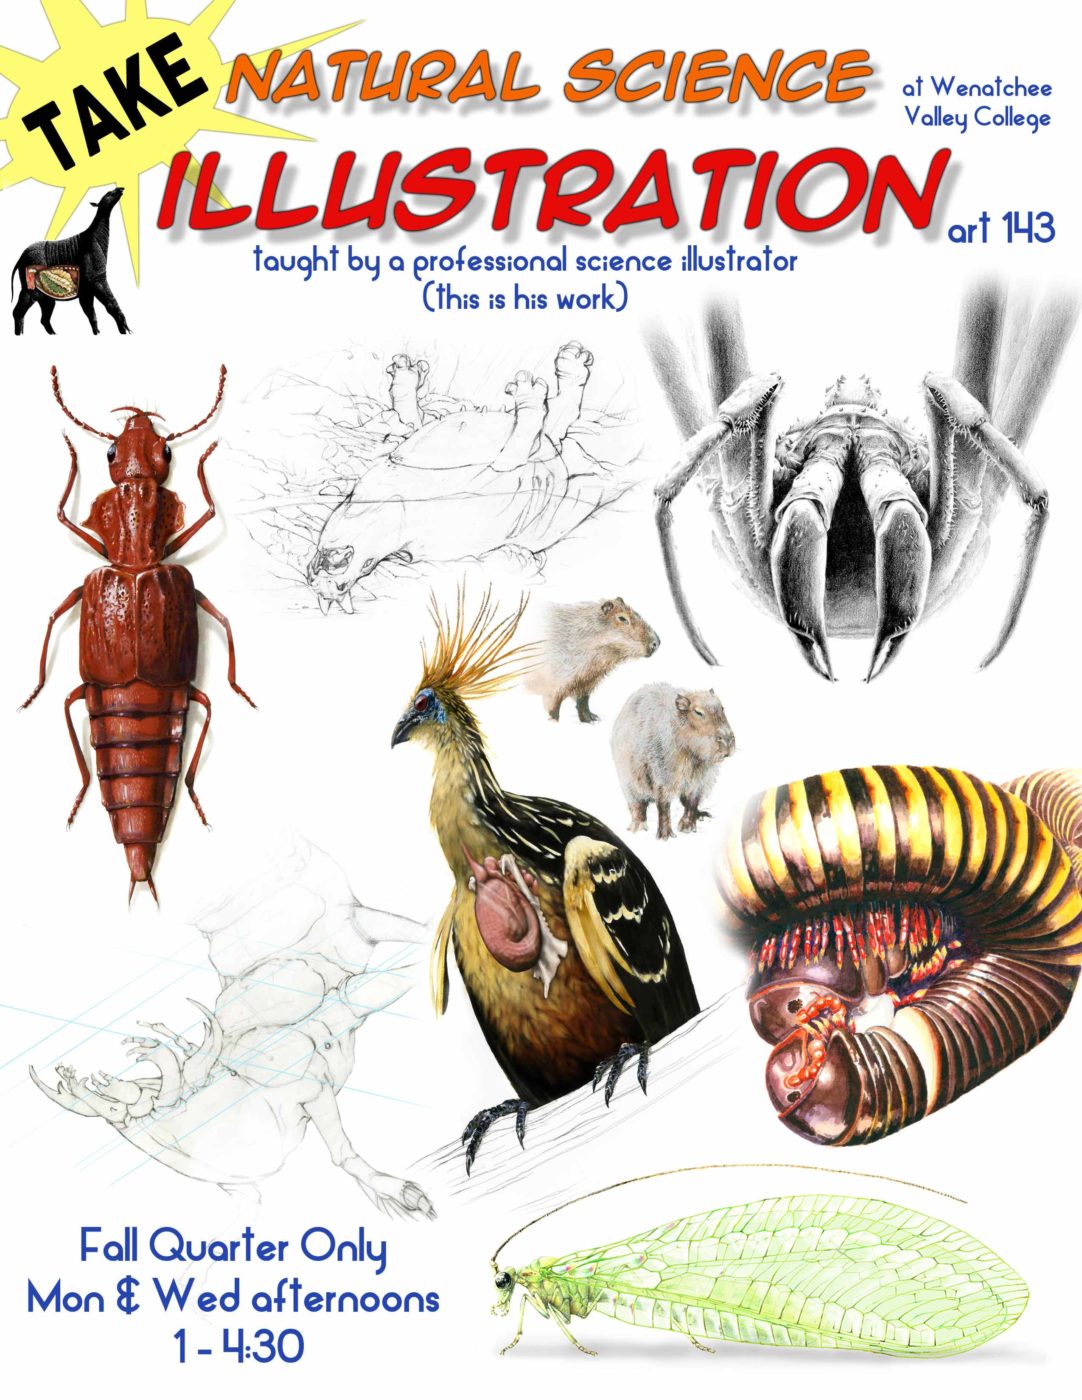 A new course in Science Illustration